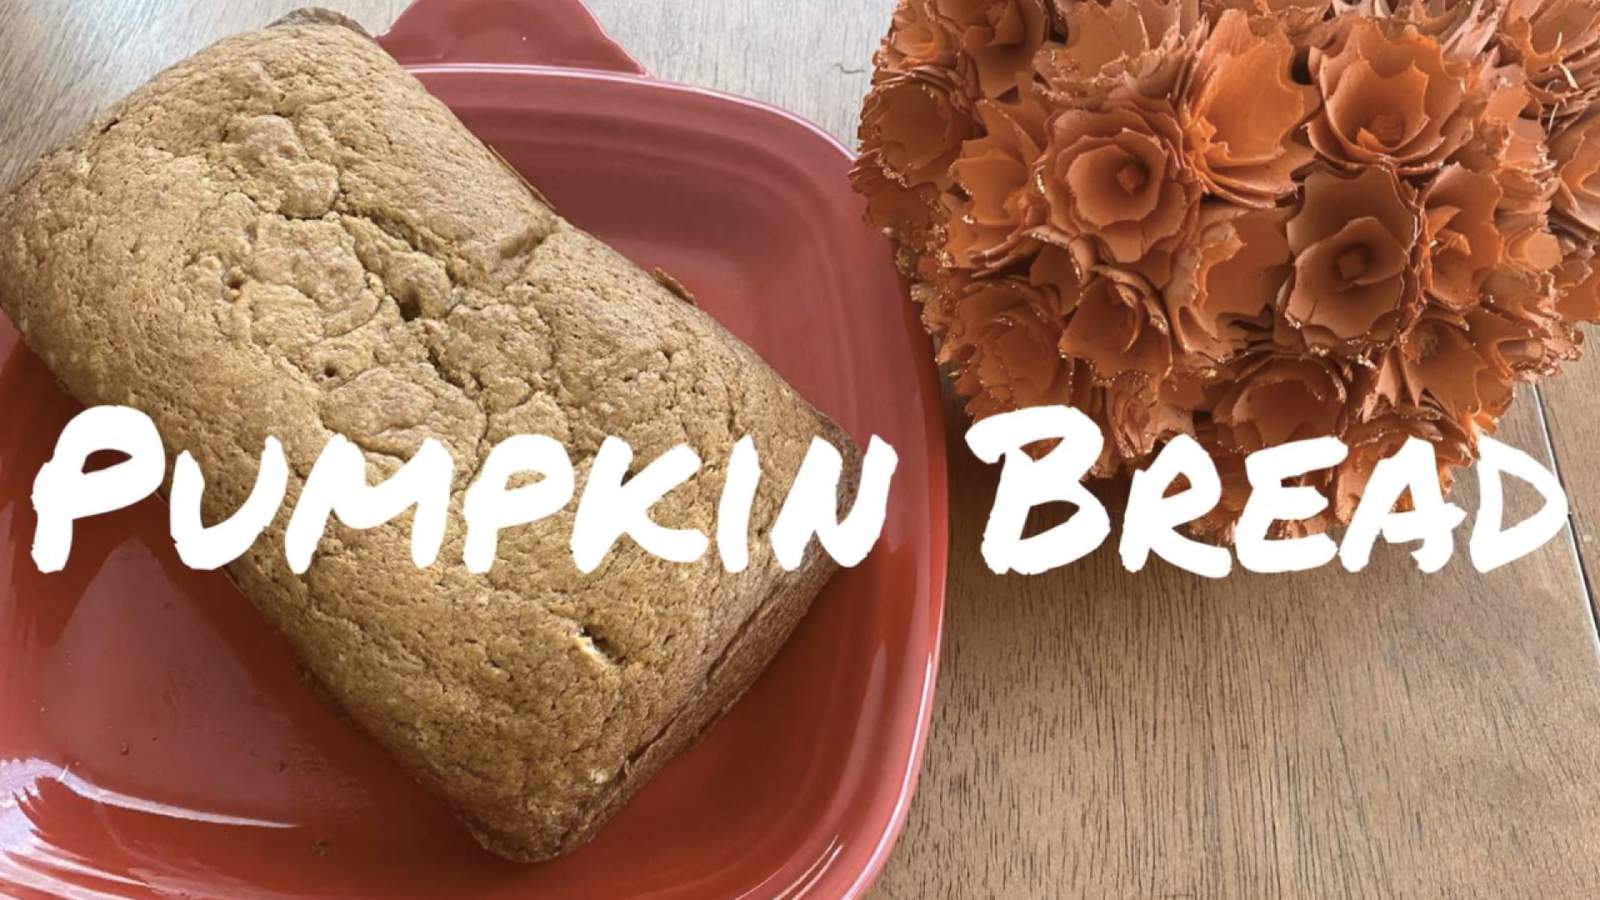 Recipe: Get your pumpkin fix this fall with some pumpkin bread